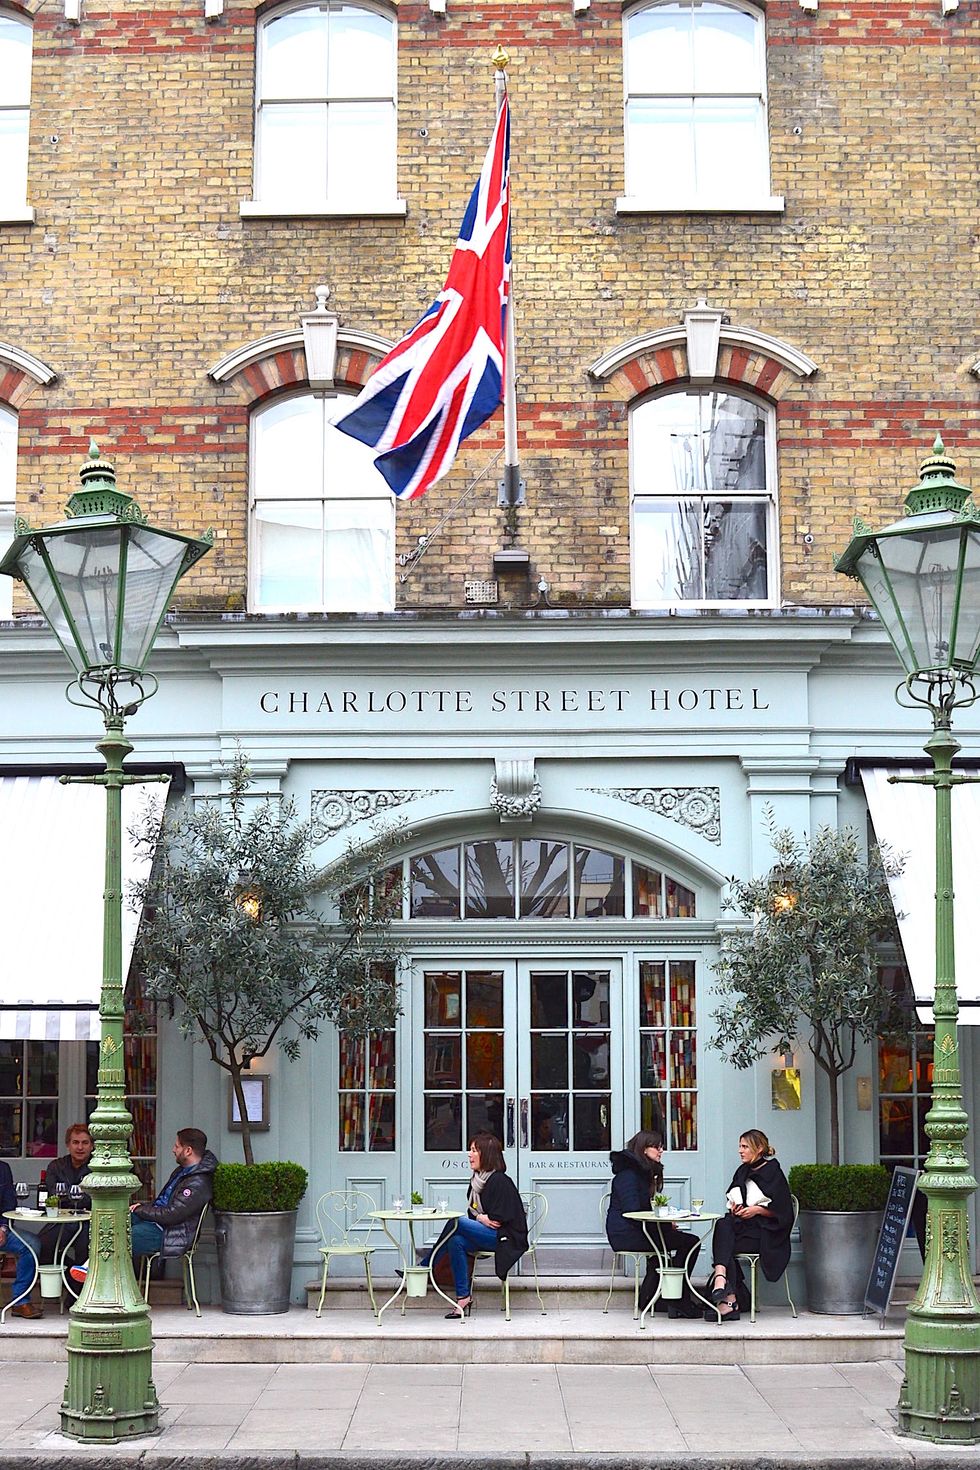           The Charlotte Street Hotel is situated just north from the vibrant Soho, in the adorable area of Fitzrovia. It's outdoor patio and chic clientele make it the perfect spot for after work cocktails.